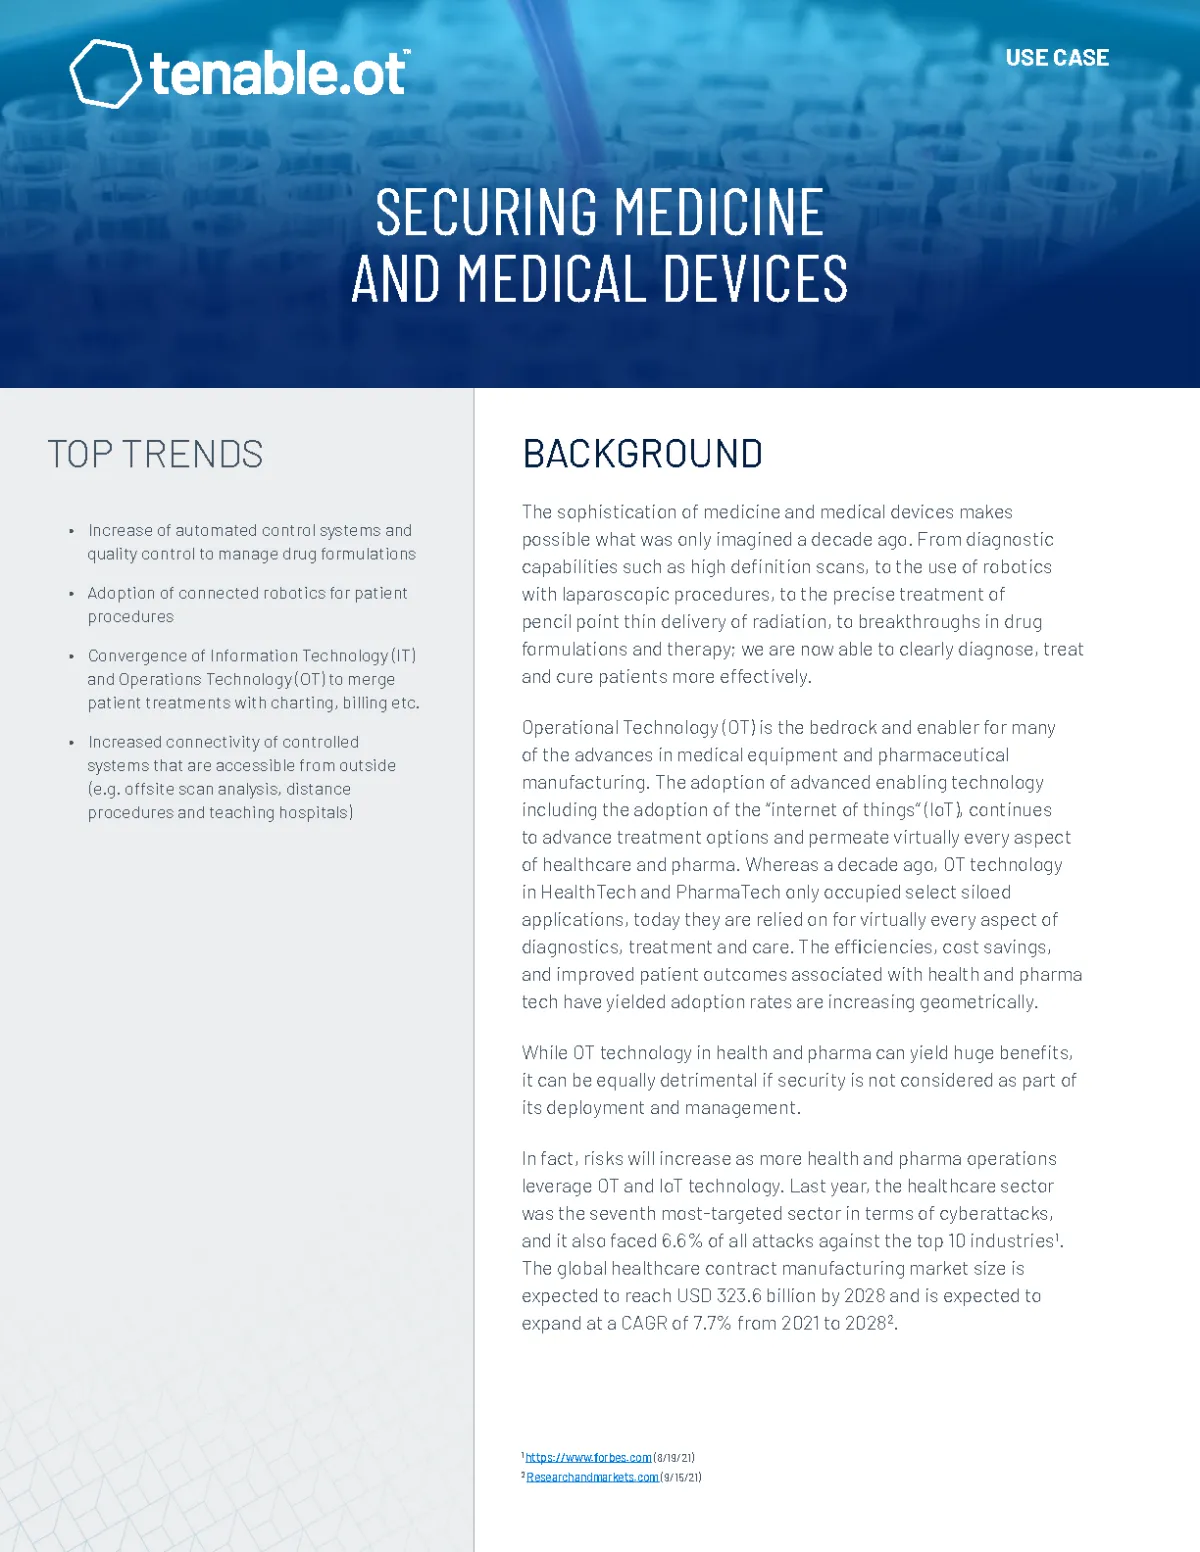 Use Case: Tenable.ot - Securing Medicine and Medical Devices